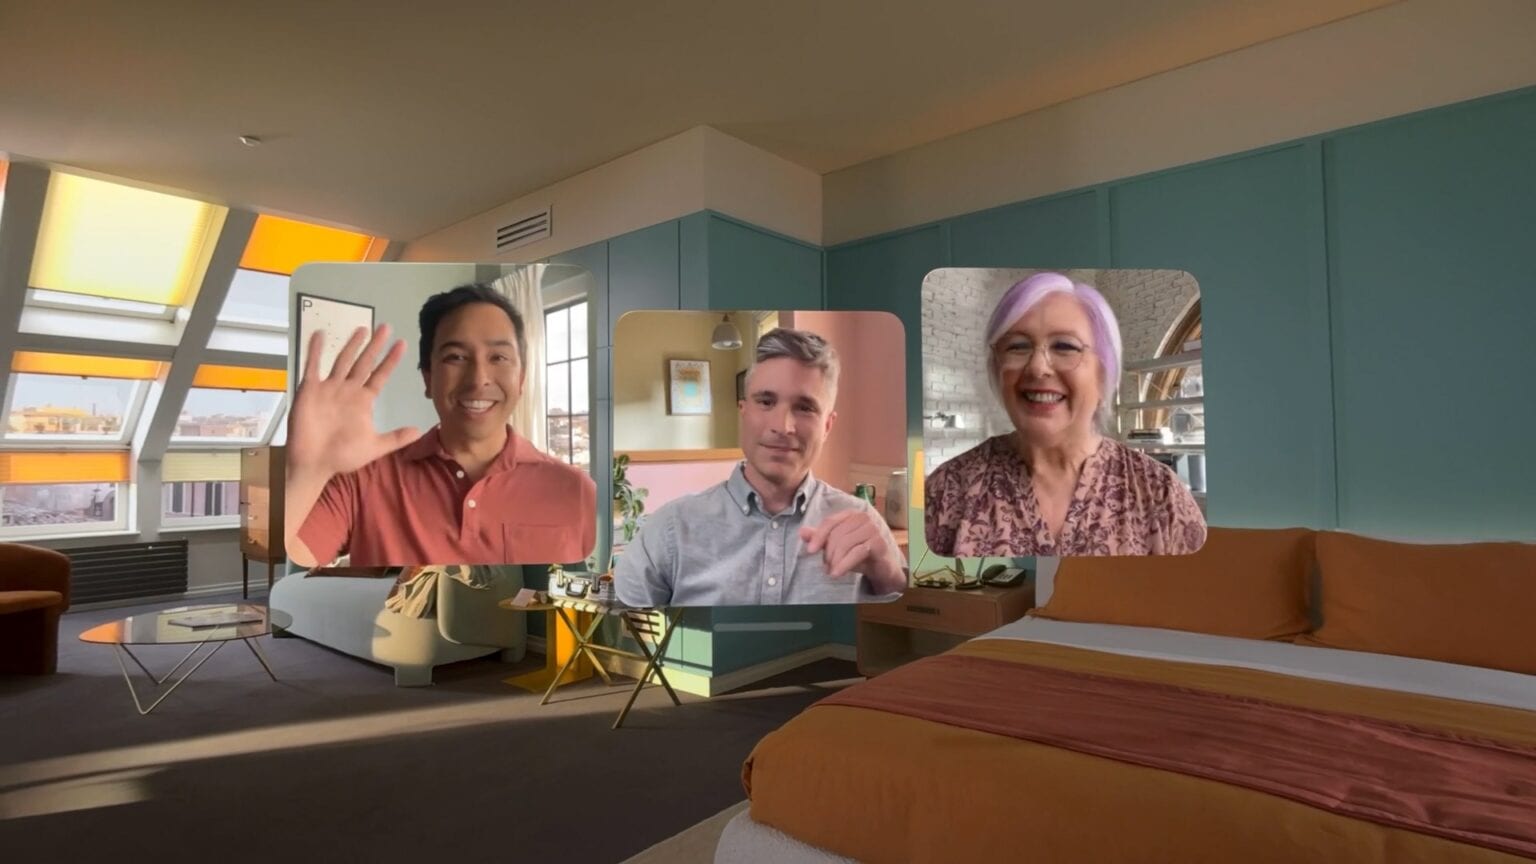 FaceTime call on Vision Pro showing three people floating in windows in a hotel room